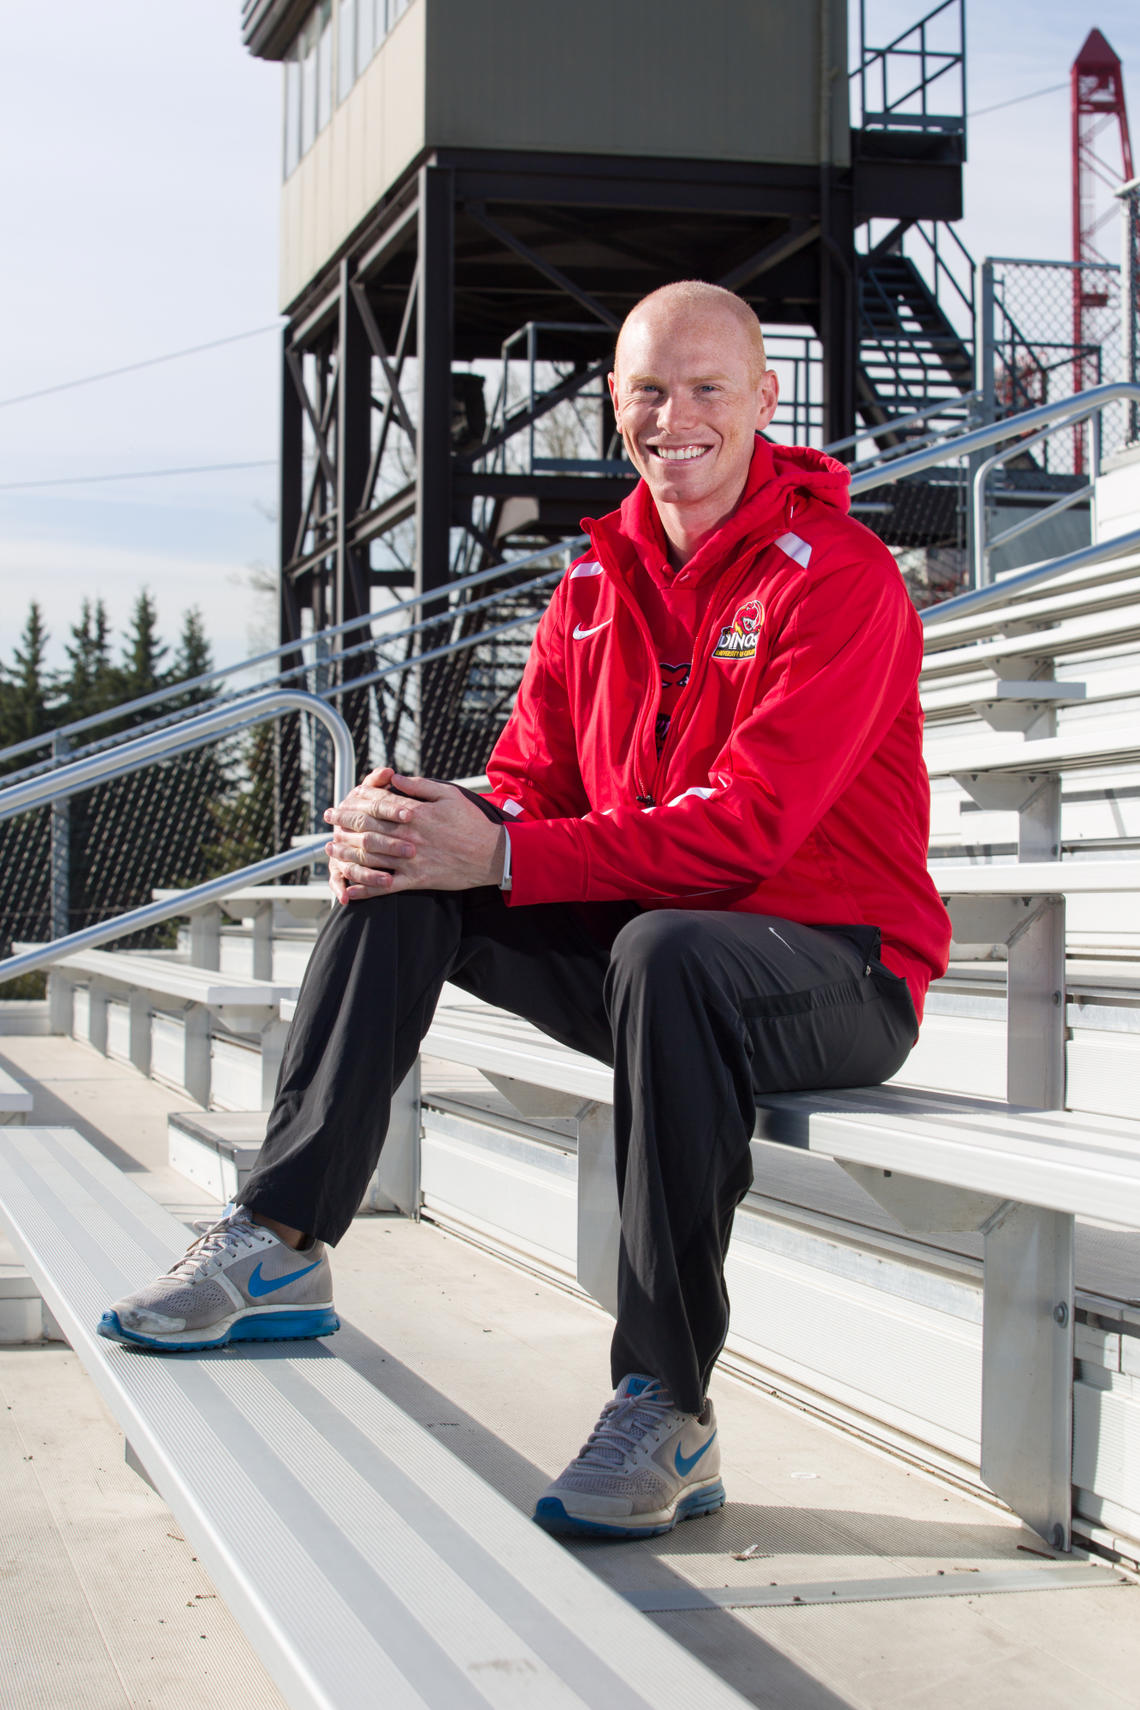 Andrew Dargie, graduate of the Cumming School of Medicine, managed to balance high-level track competitions and 24-hour medical school rotations. After he convocates May 7, Dargie will begin preparing for a residency in vascular surgery at the University of Manitoba where he may lace up once again.